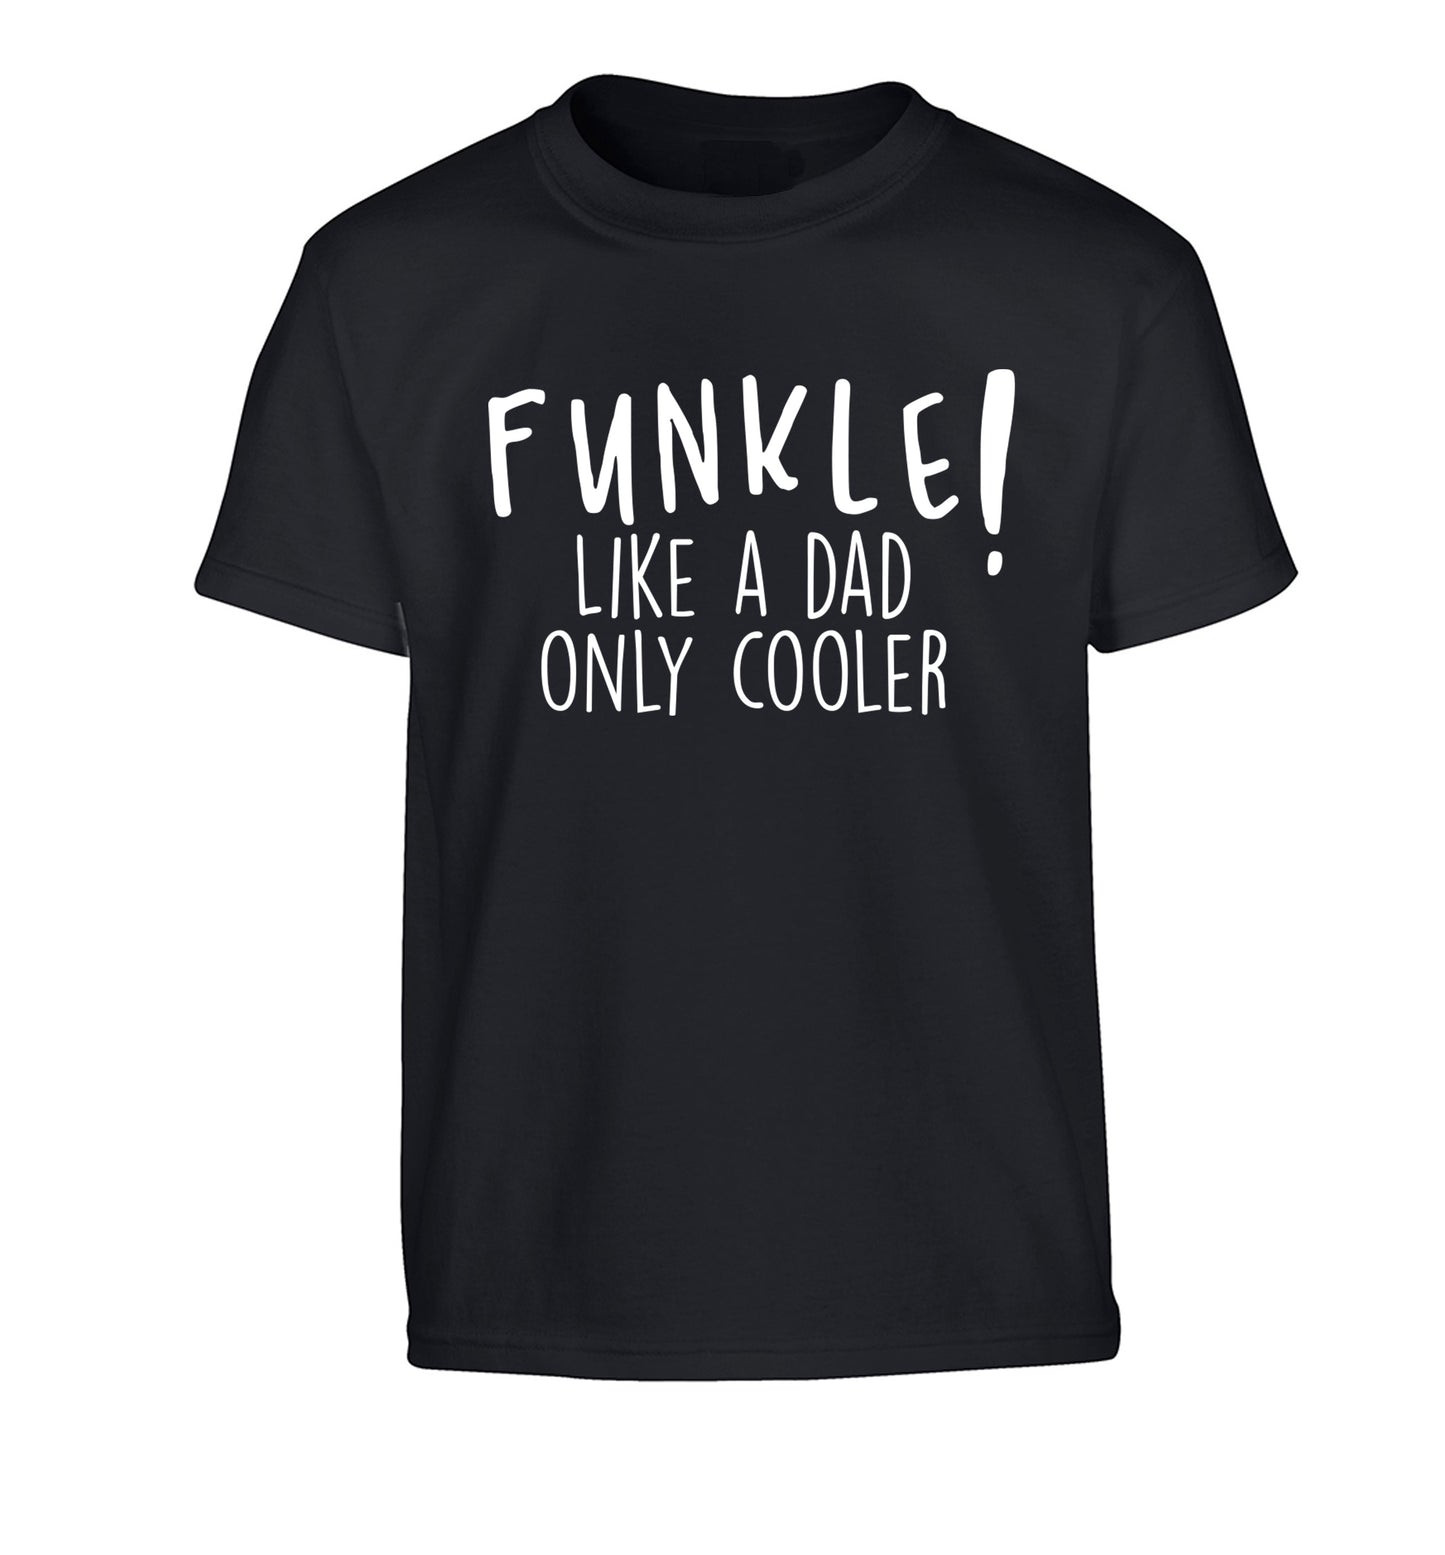 Funkle Like a Dad Only Cooler Children's black Tshirt 12-13 Years